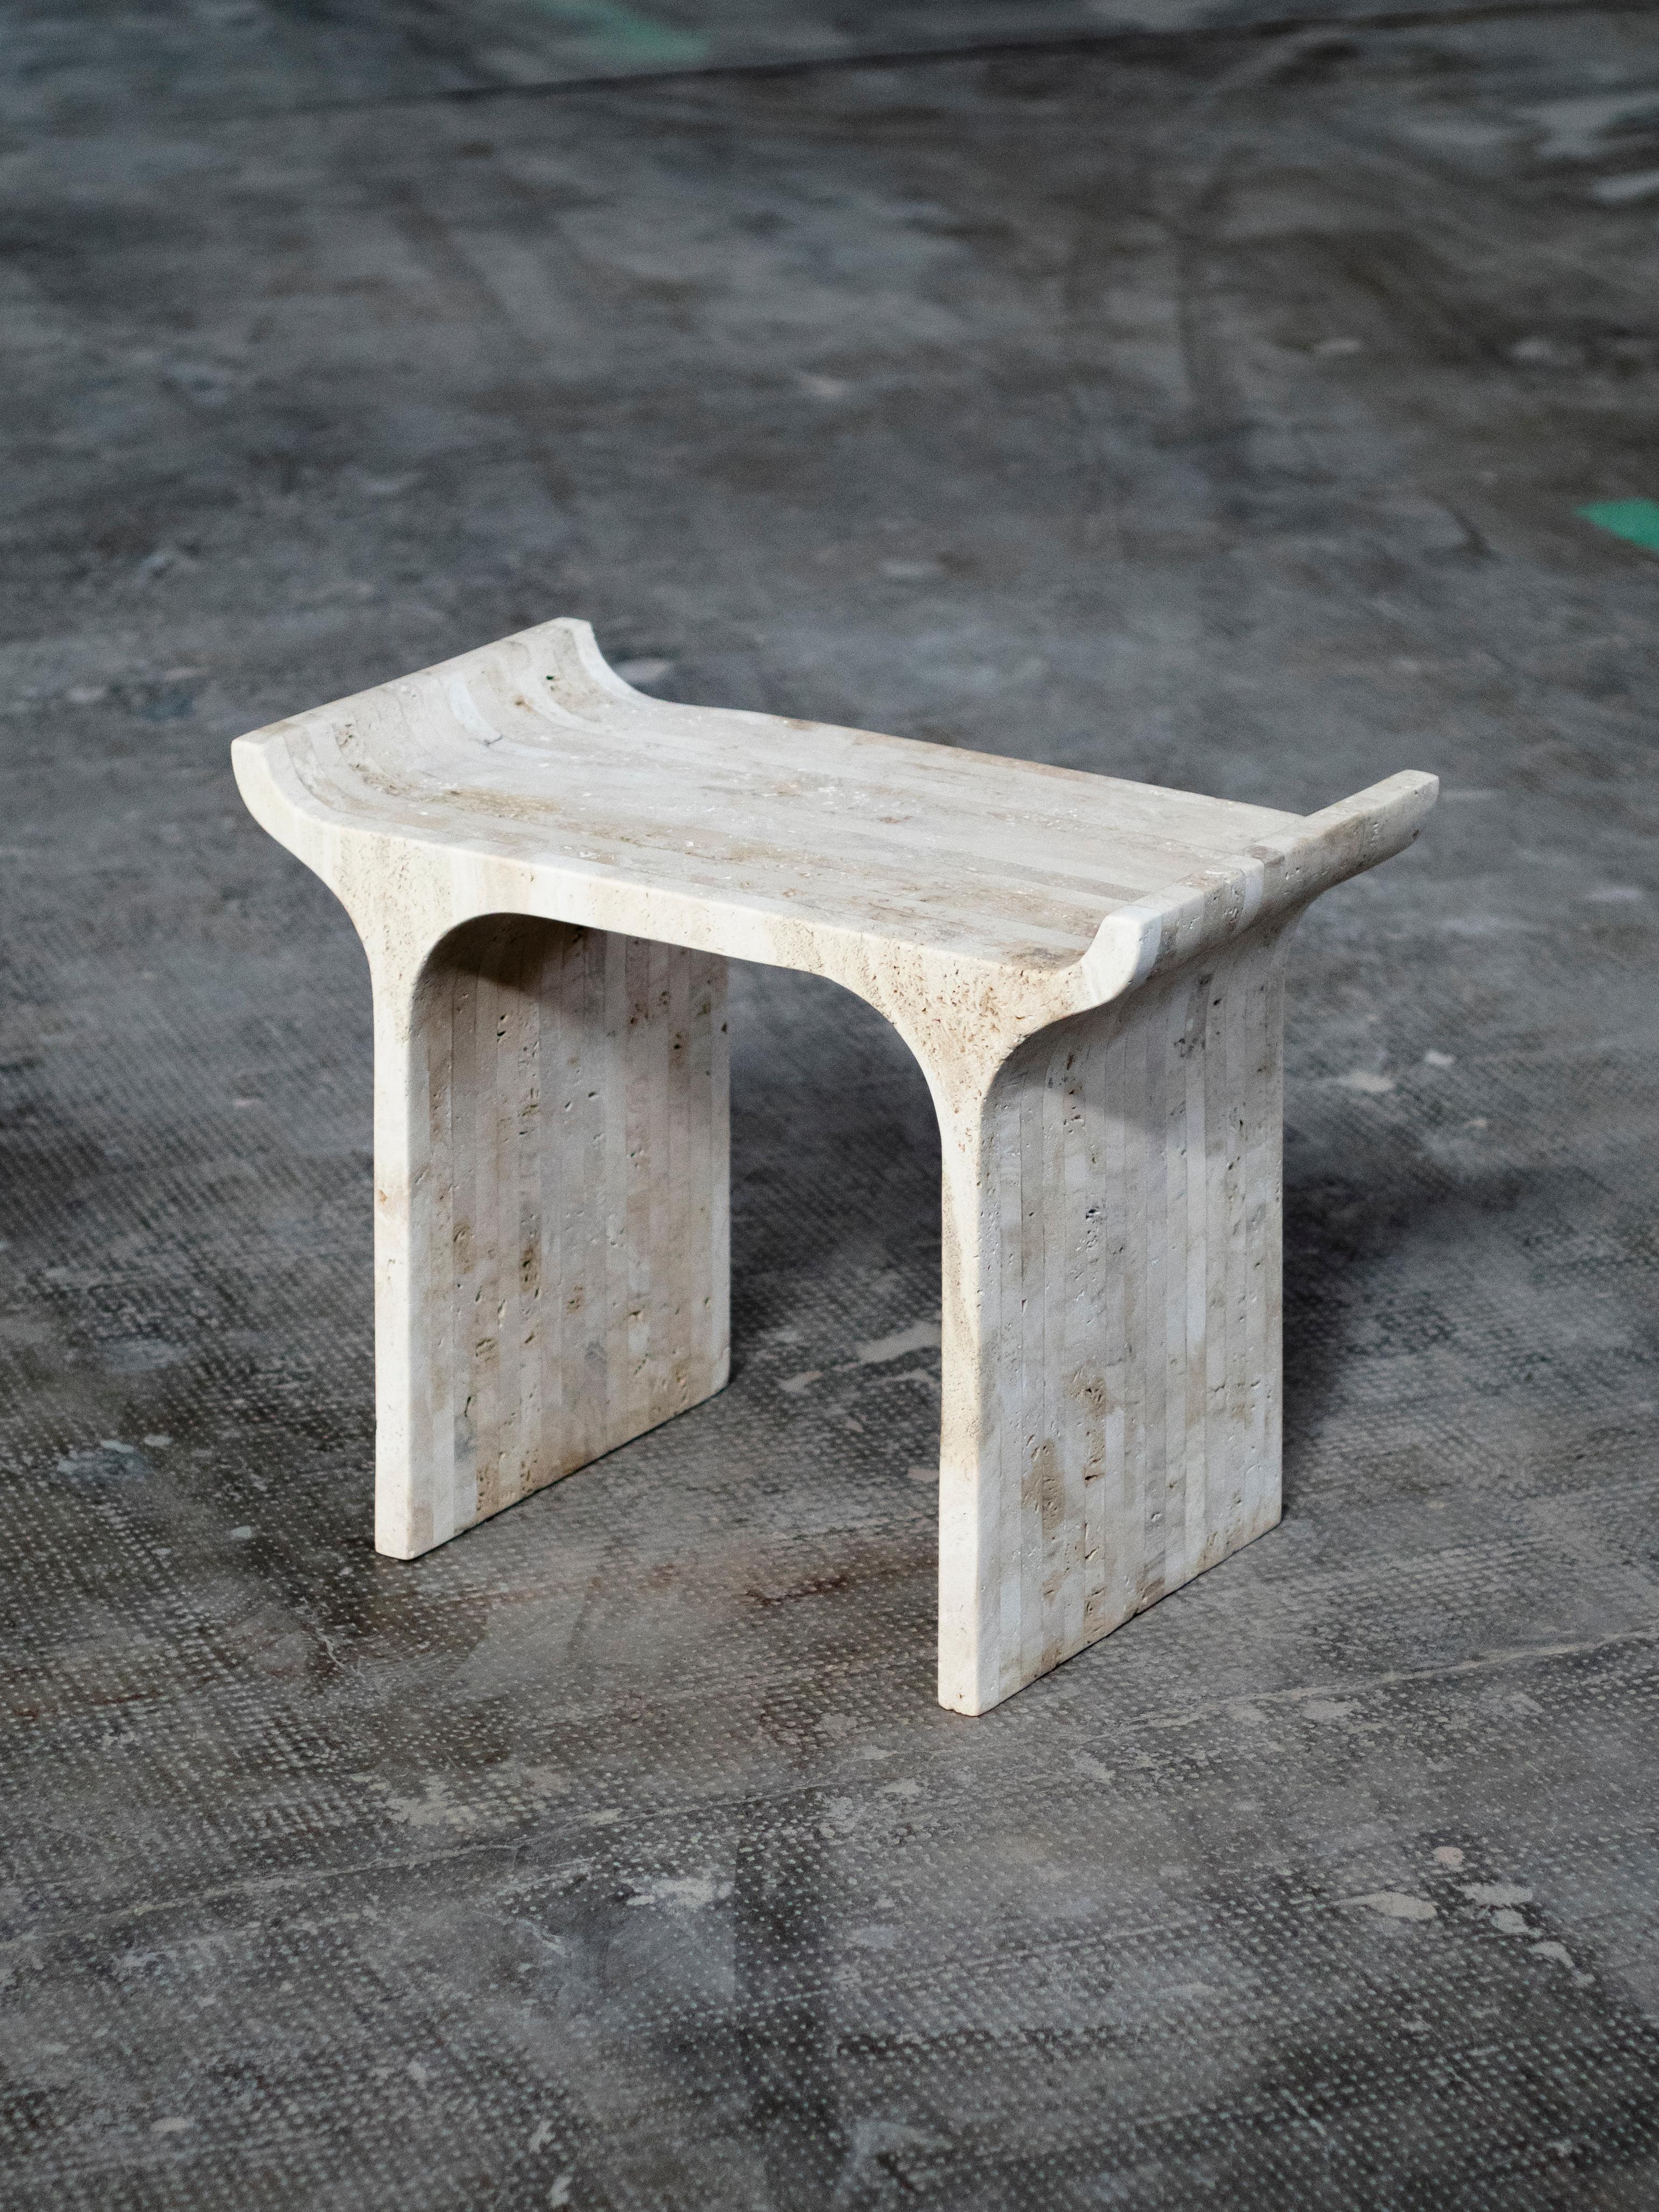 Tori Stool Travertine by Ries
Dimensions: W60 x D44 x H86 cm 
Materials: Travertine

Also Available: Tori Stool Sand Cast Aluminium, please contact us

Ries is a design studio based in Buenos Aires, Argentina, focused on product and